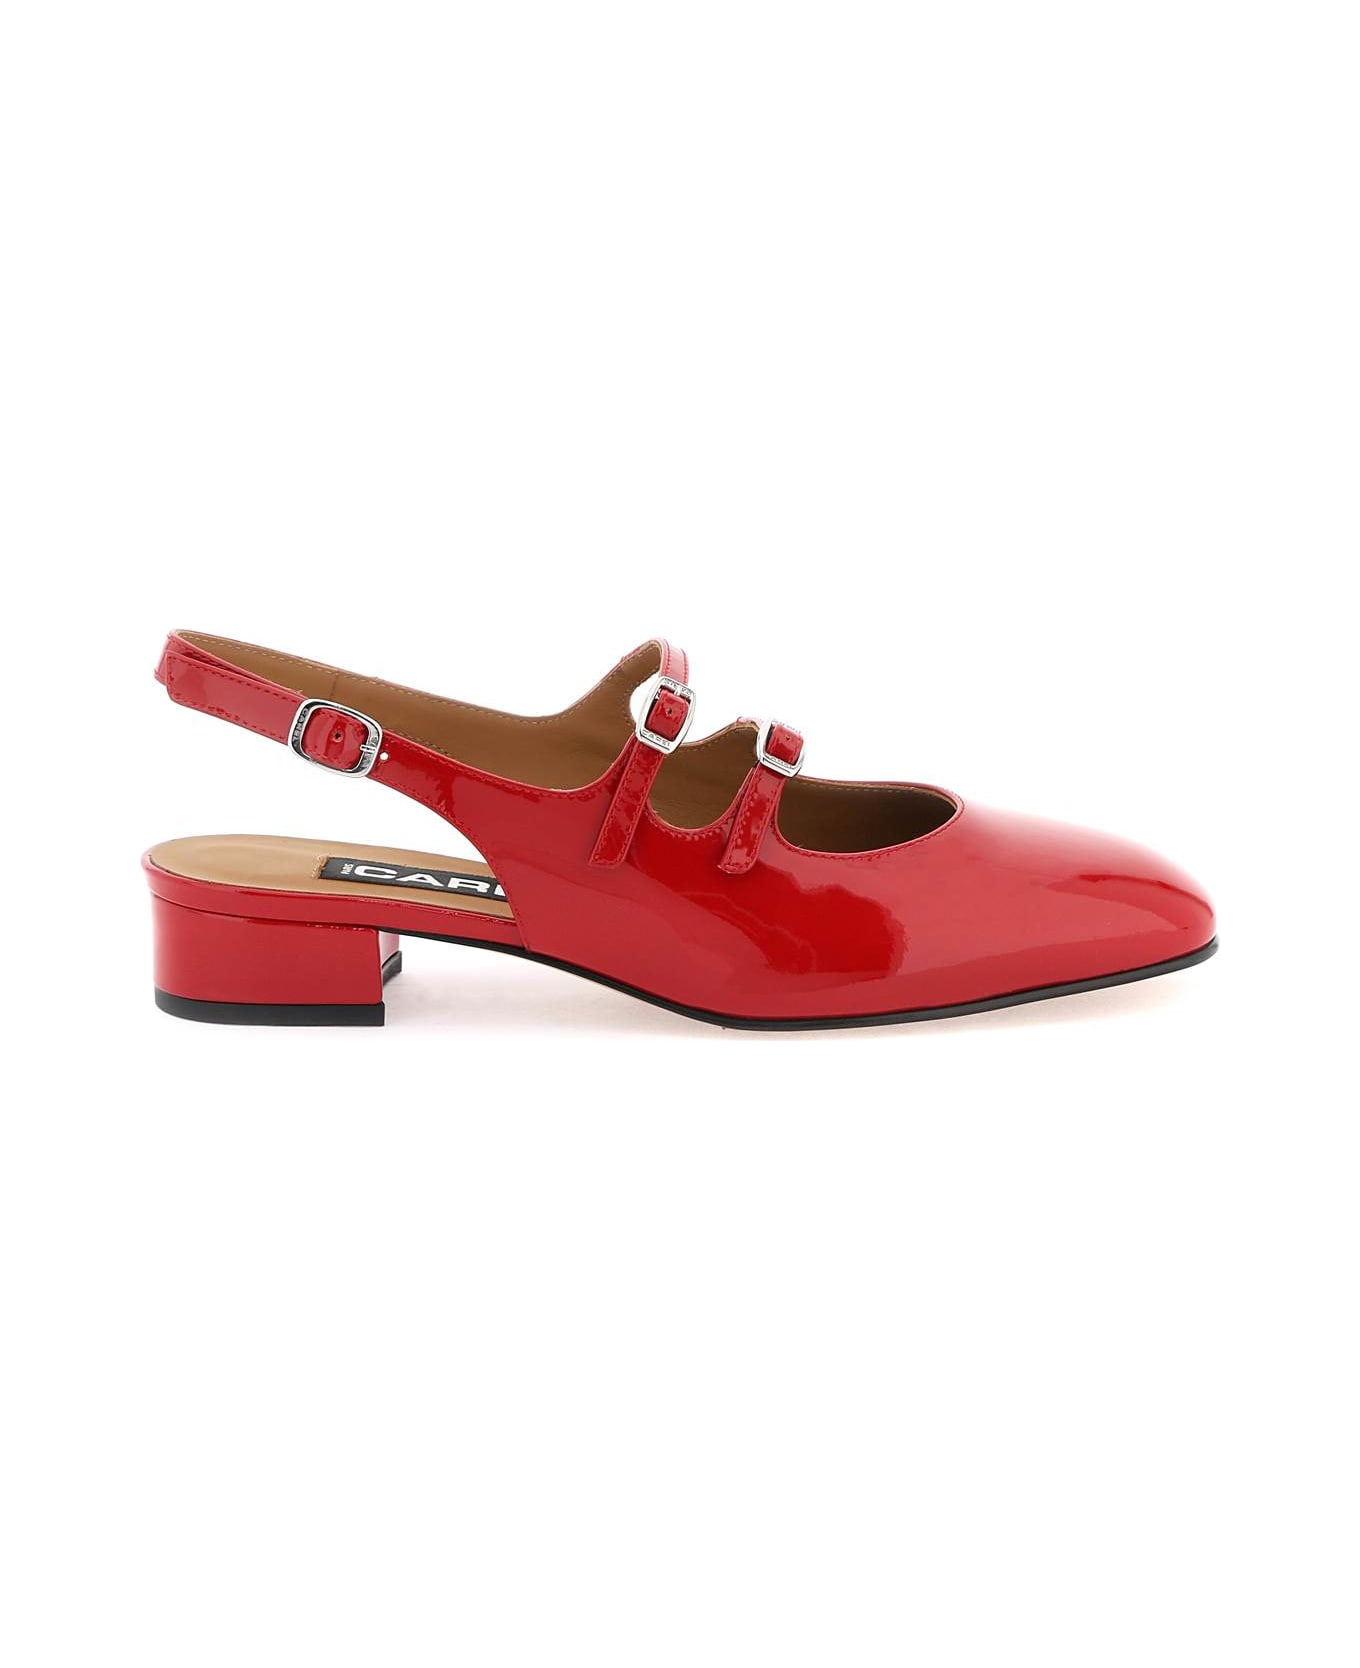 Carel Patent Leather Pêche Slingback Mary Jane - ROUGE (Red) ハイヒール